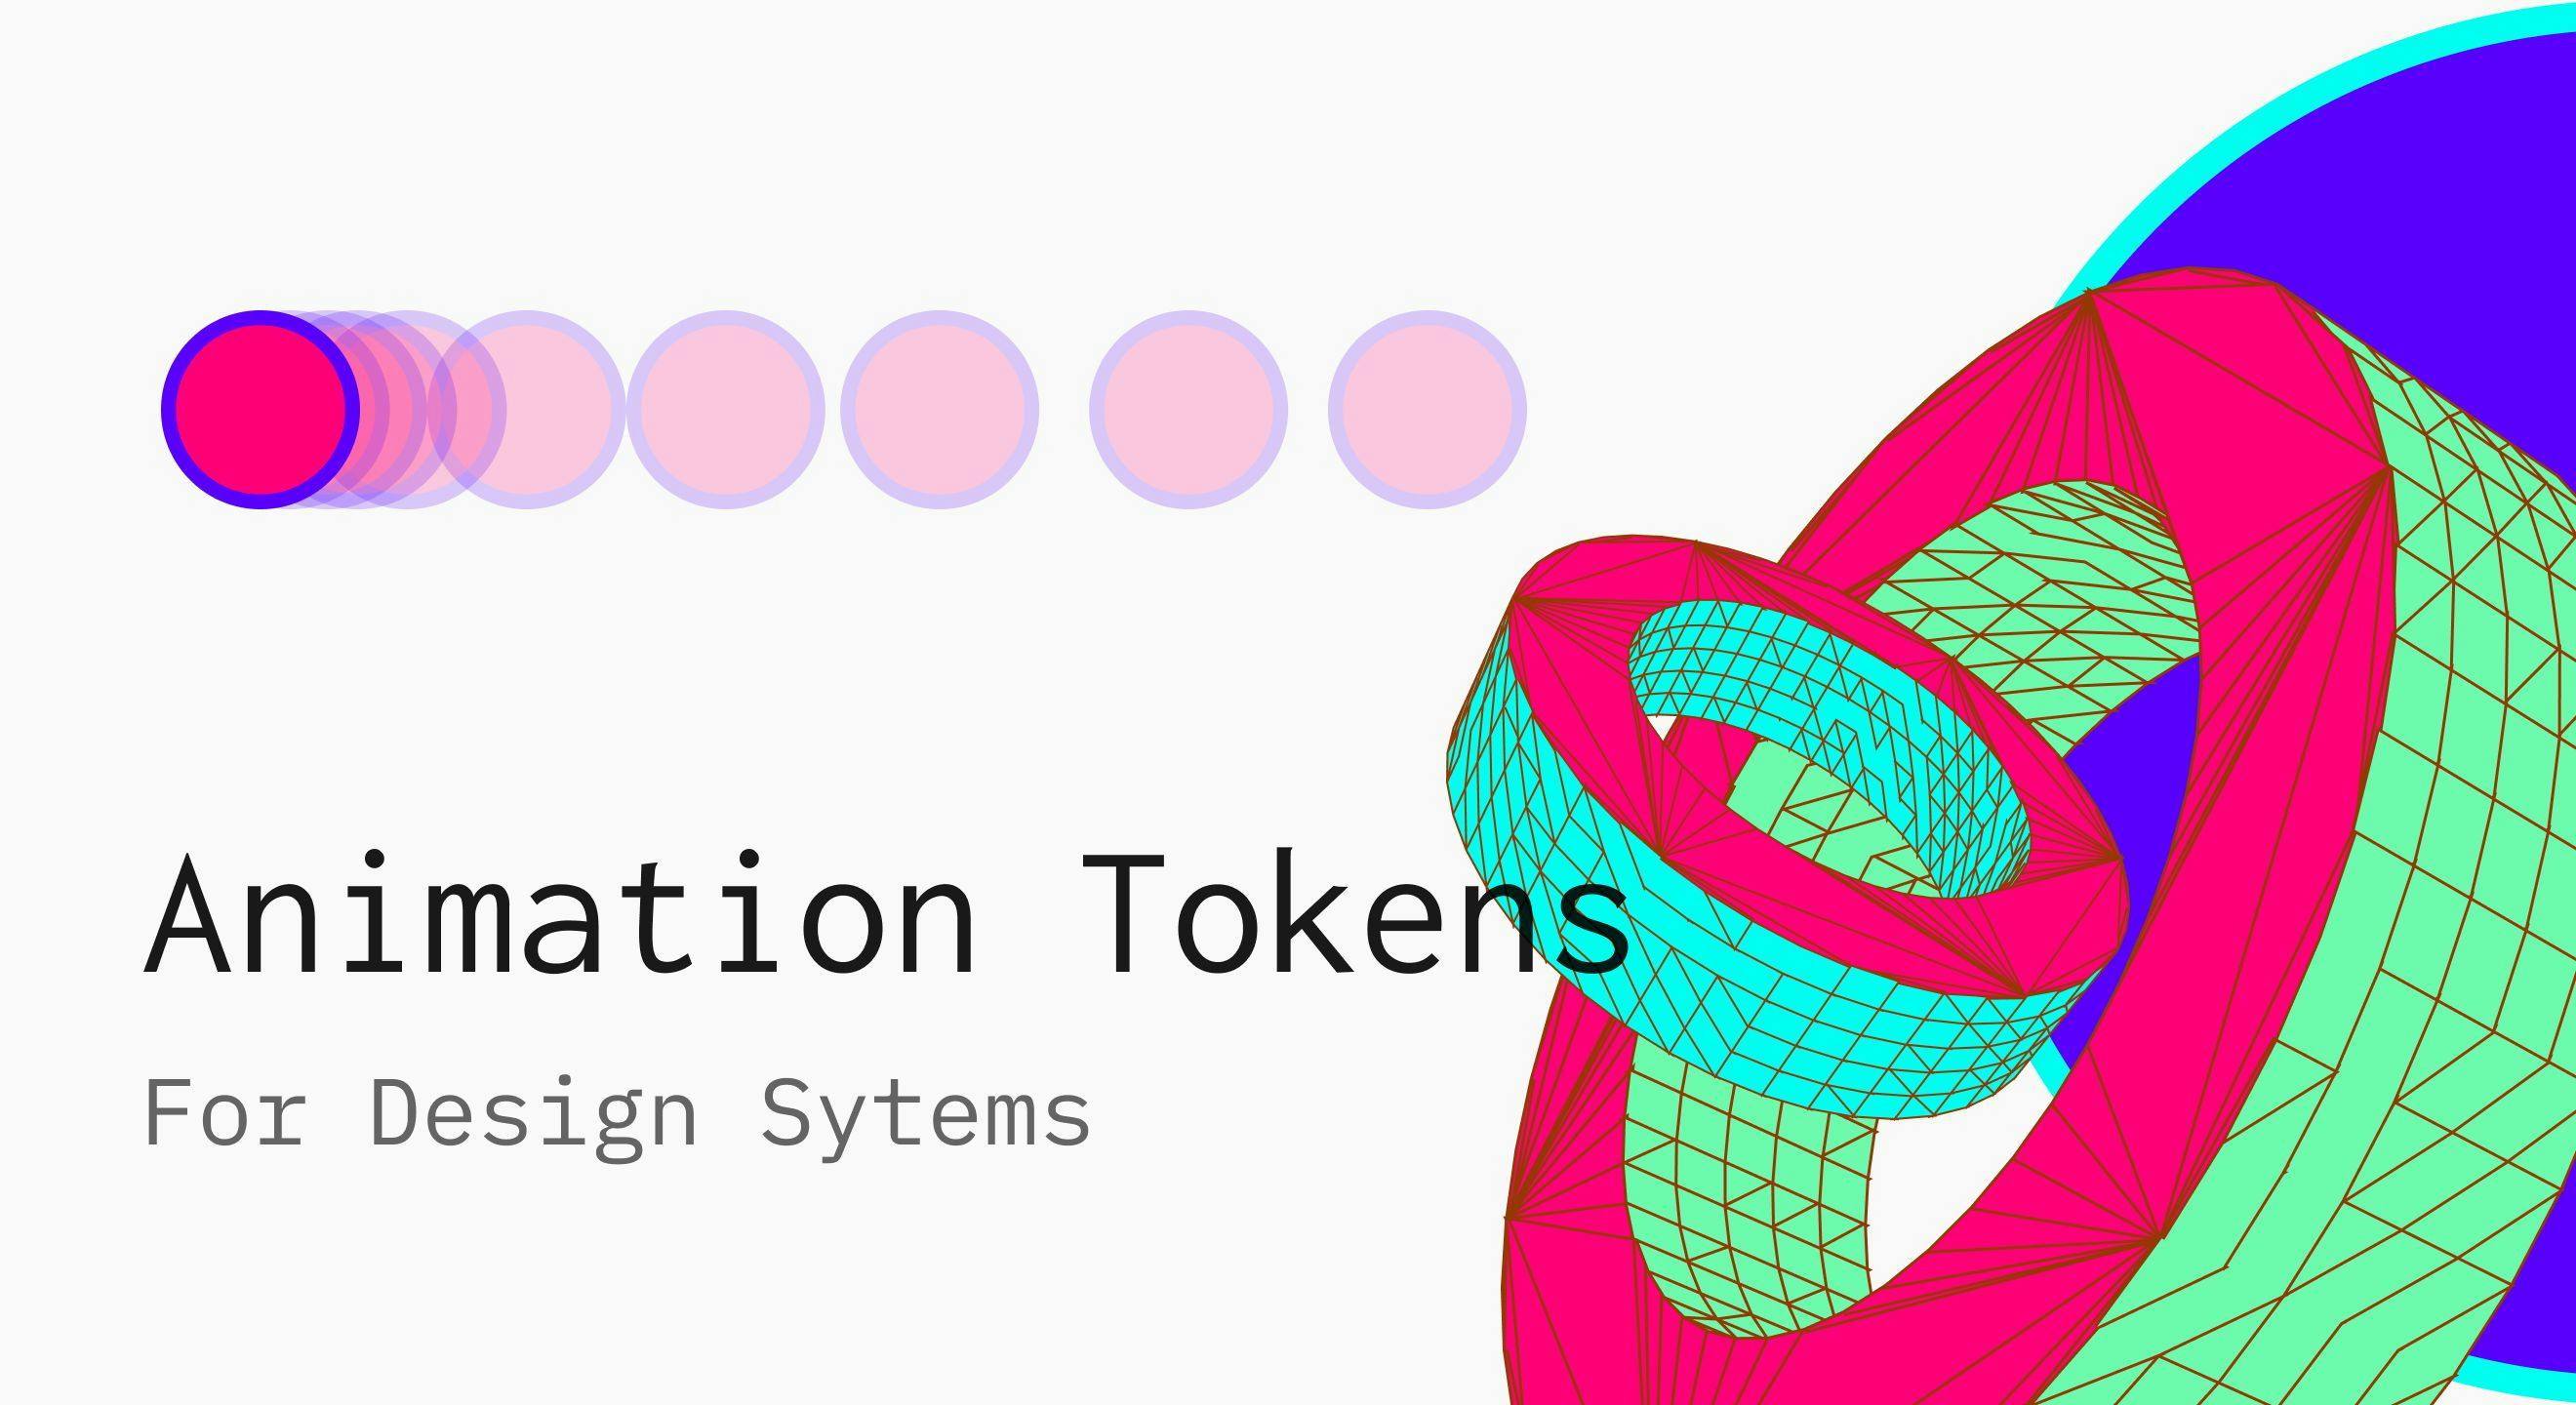 /using-animationmotion-design-tokens-for-more-complex-and-sophisticated-design-zy3t33y5 feature image